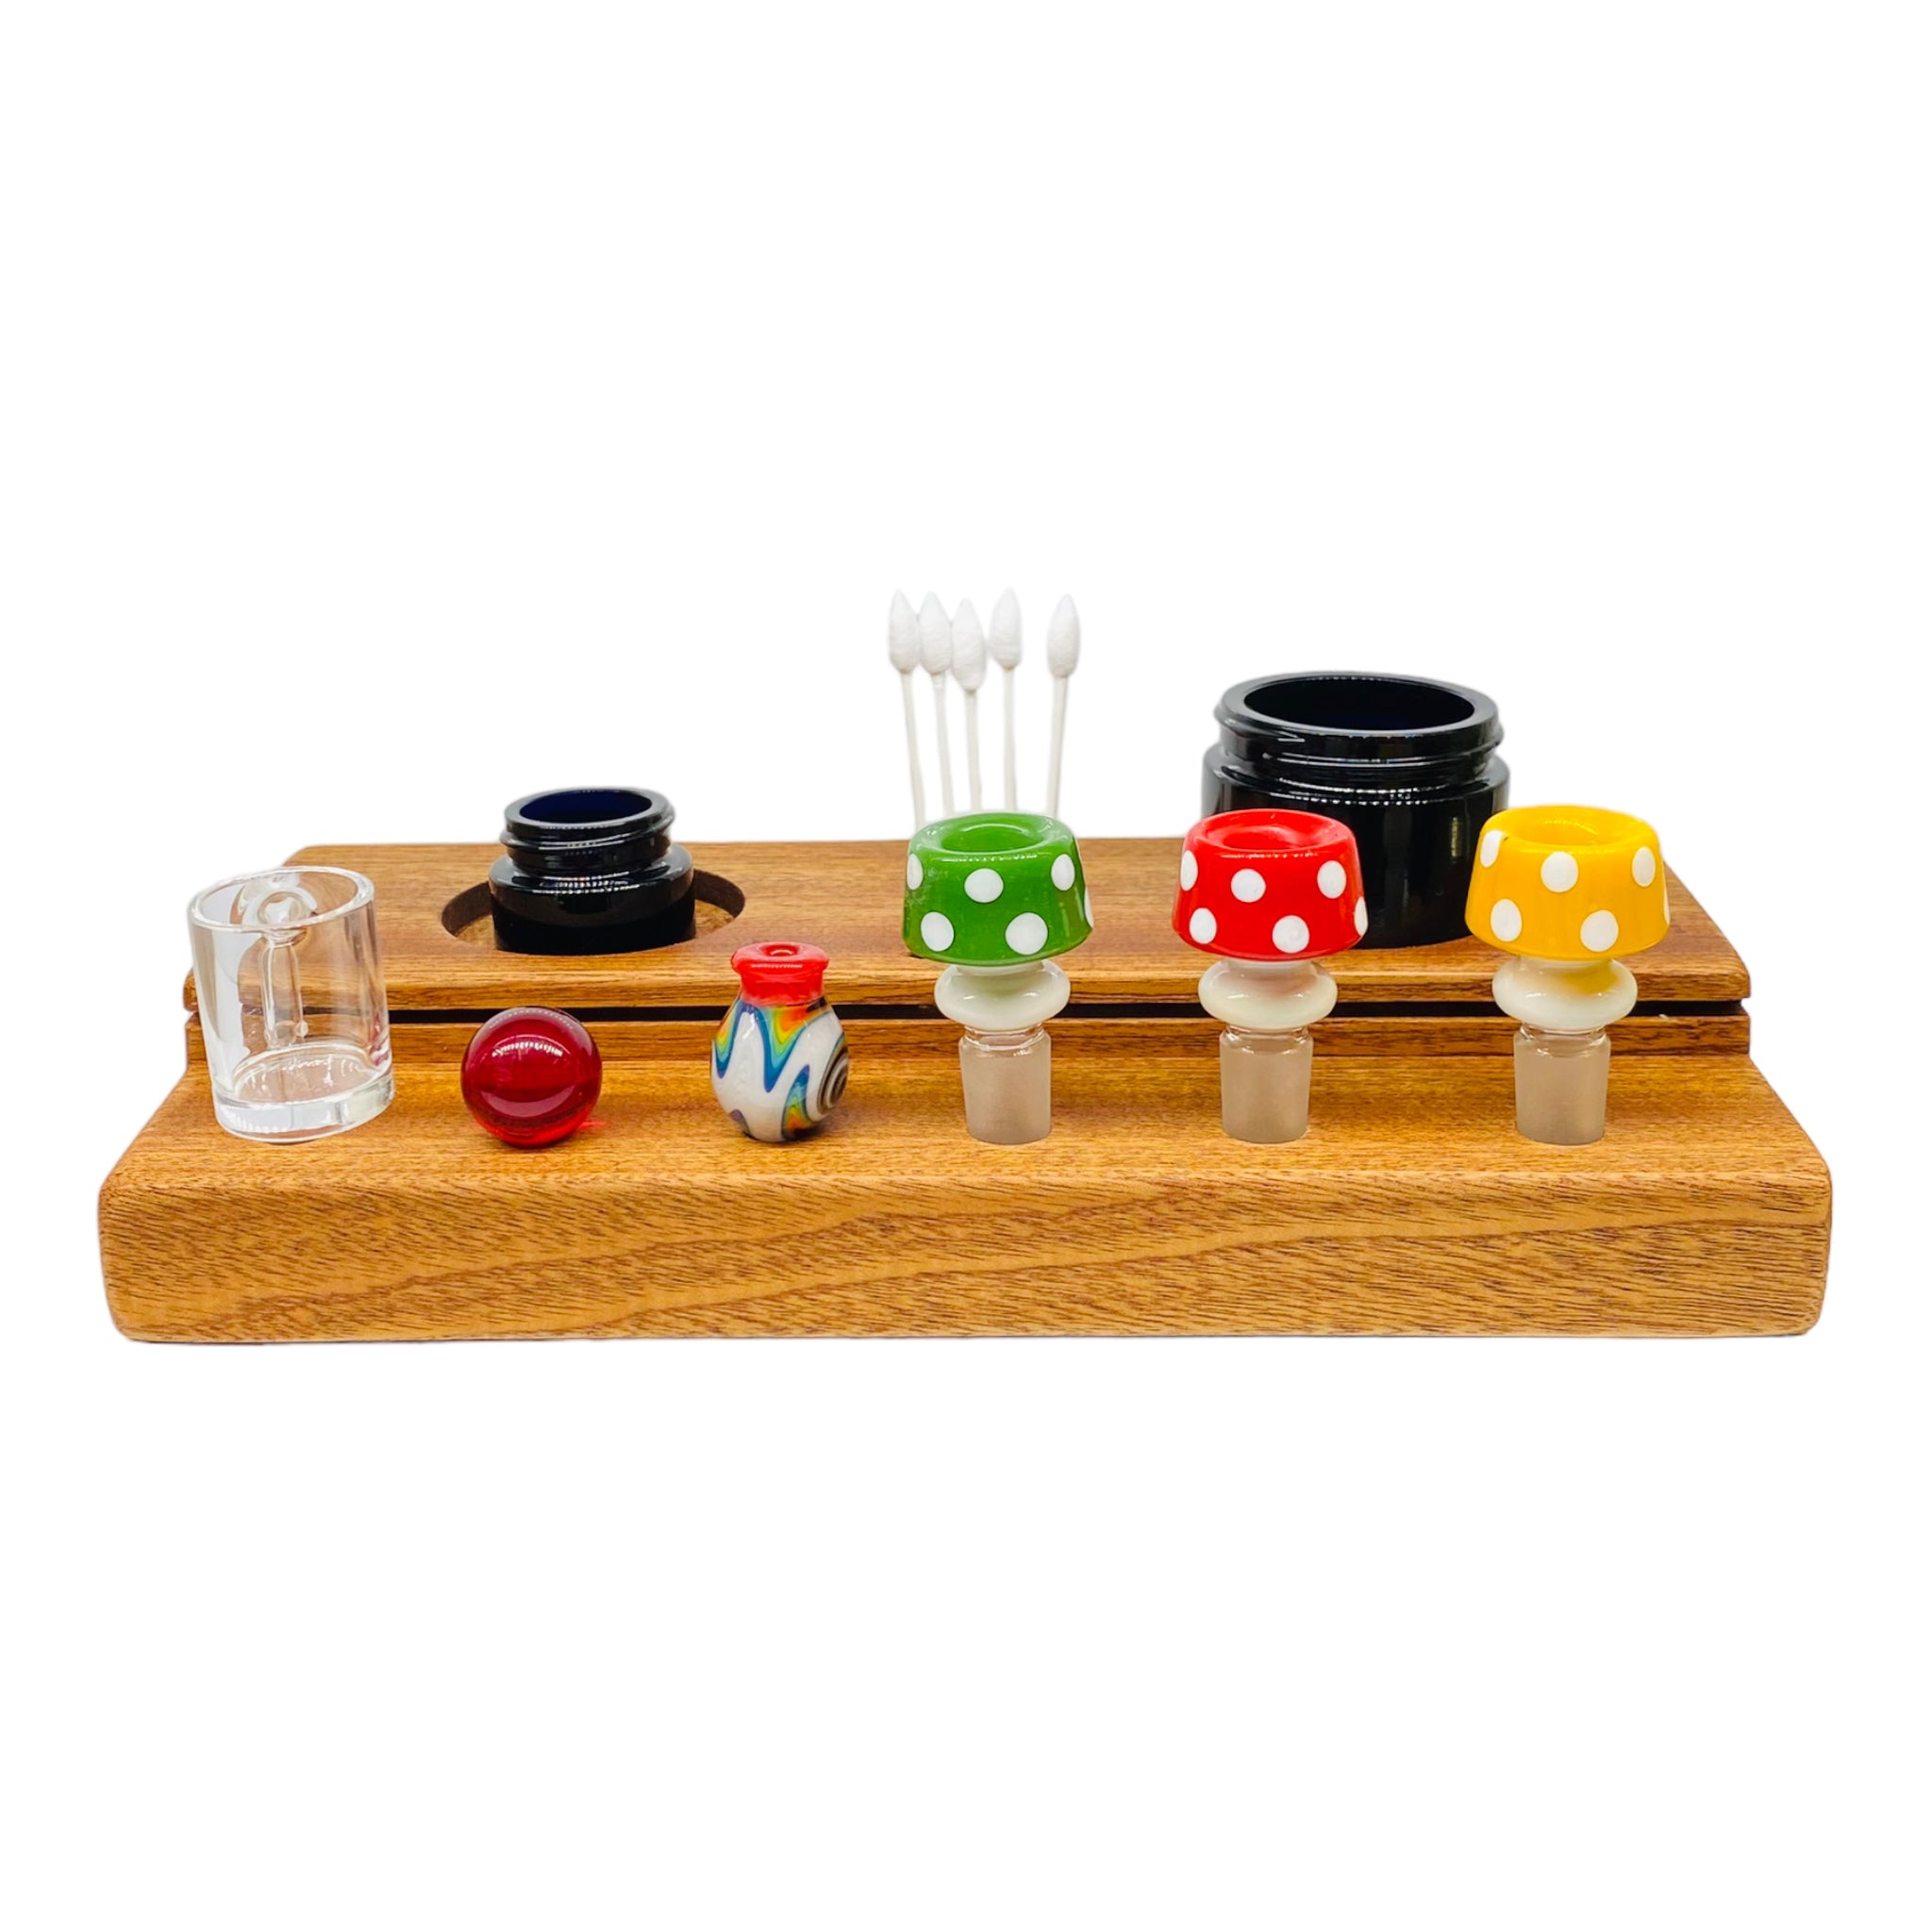 This Multi Hole Wood Dab Station And Display Stand Holder is made from premium mahogany and features two different sized holes for jars, two slots to hold Q Tips, and three 10mm and 14mm holes to hold various bong bowl pieces or quartz bangers. A perfect storage solution for the dab connoisseur.